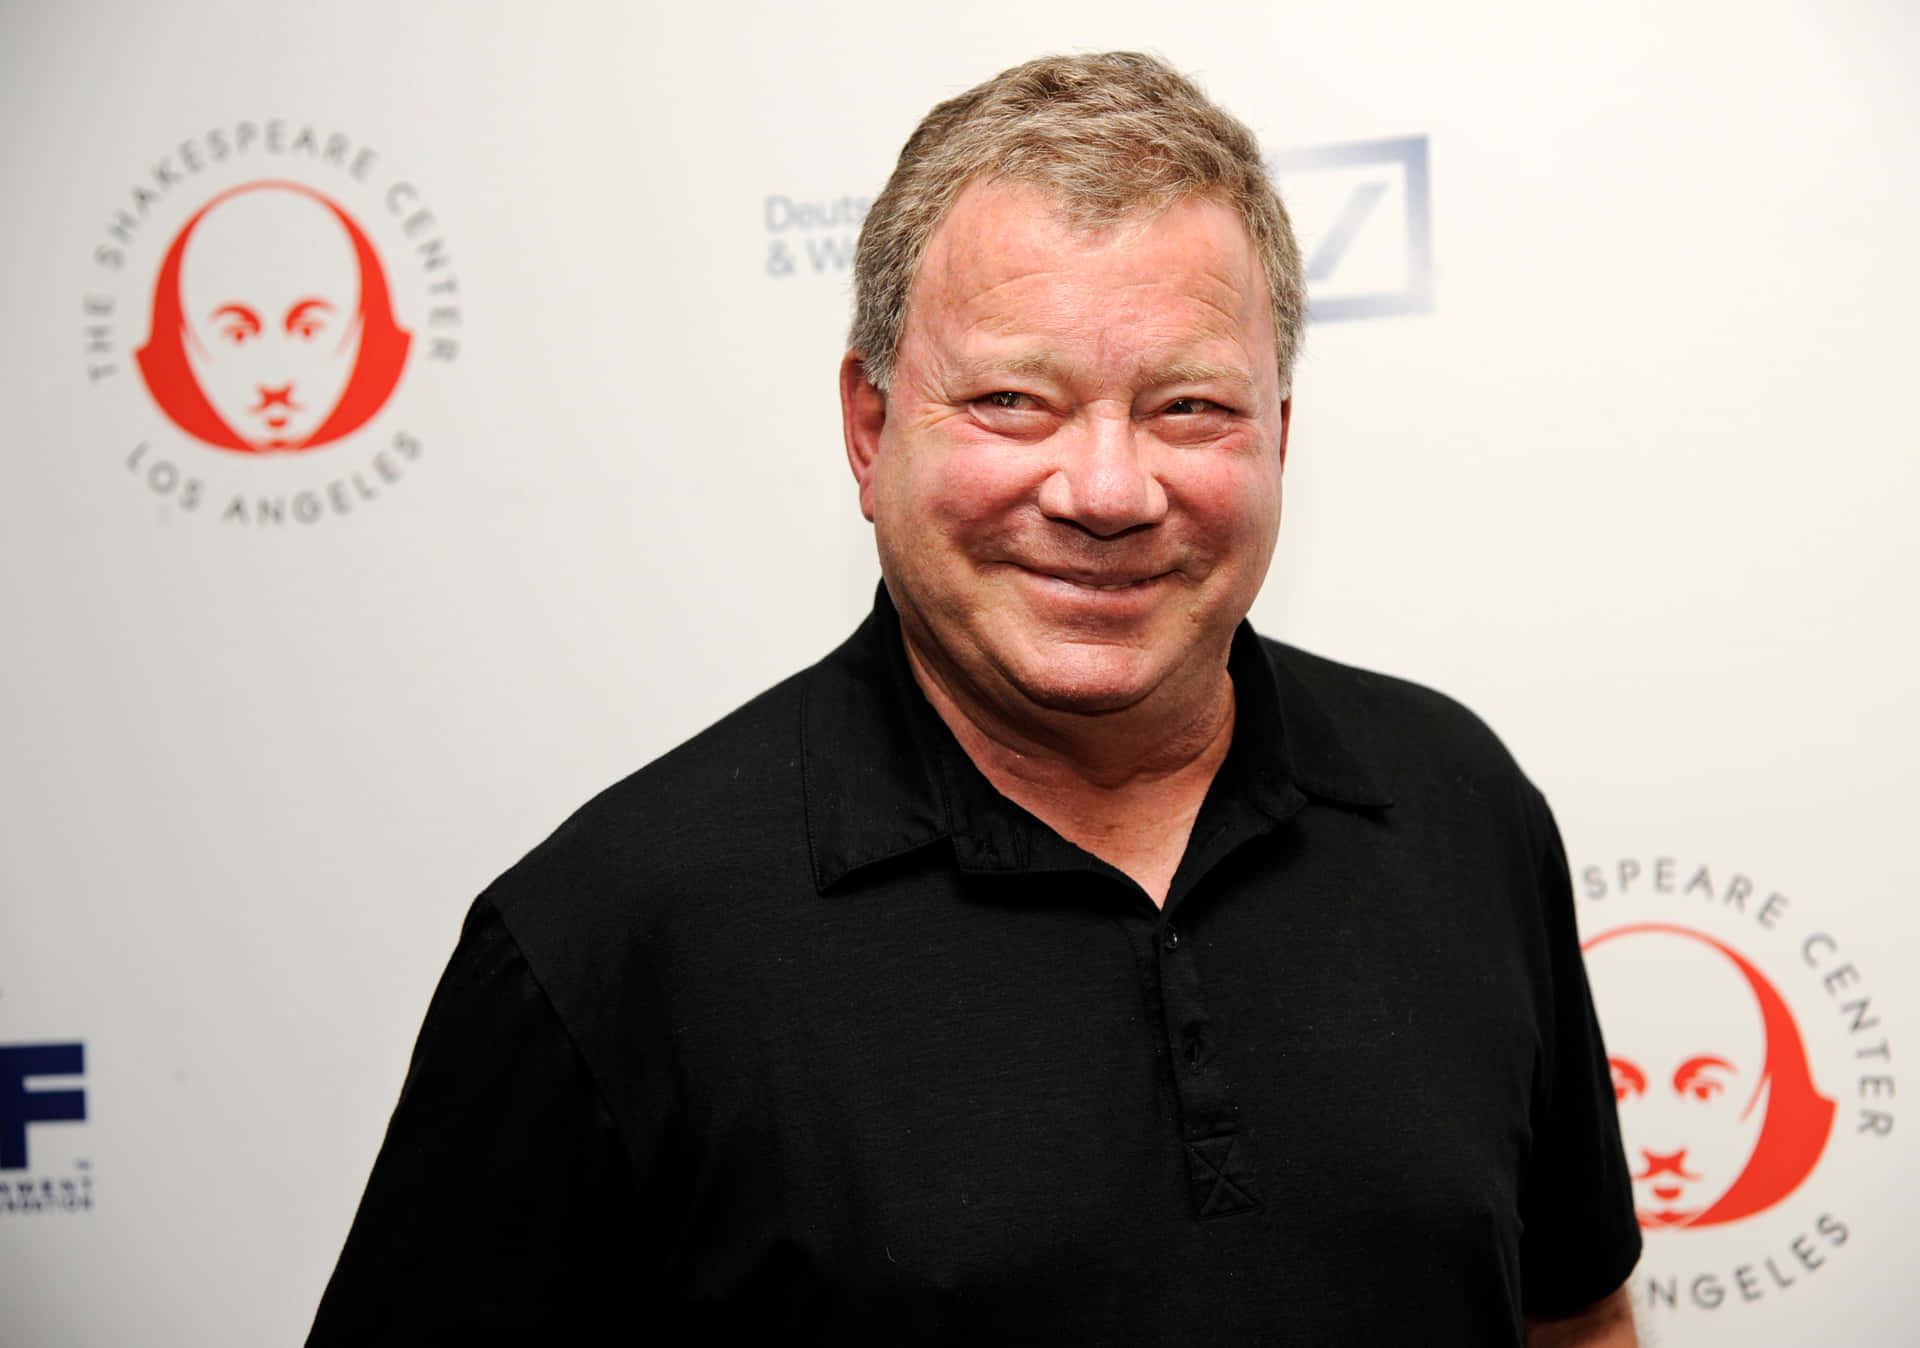 William Shatner Smiling In A Black Suit With A Blue Shirt Background